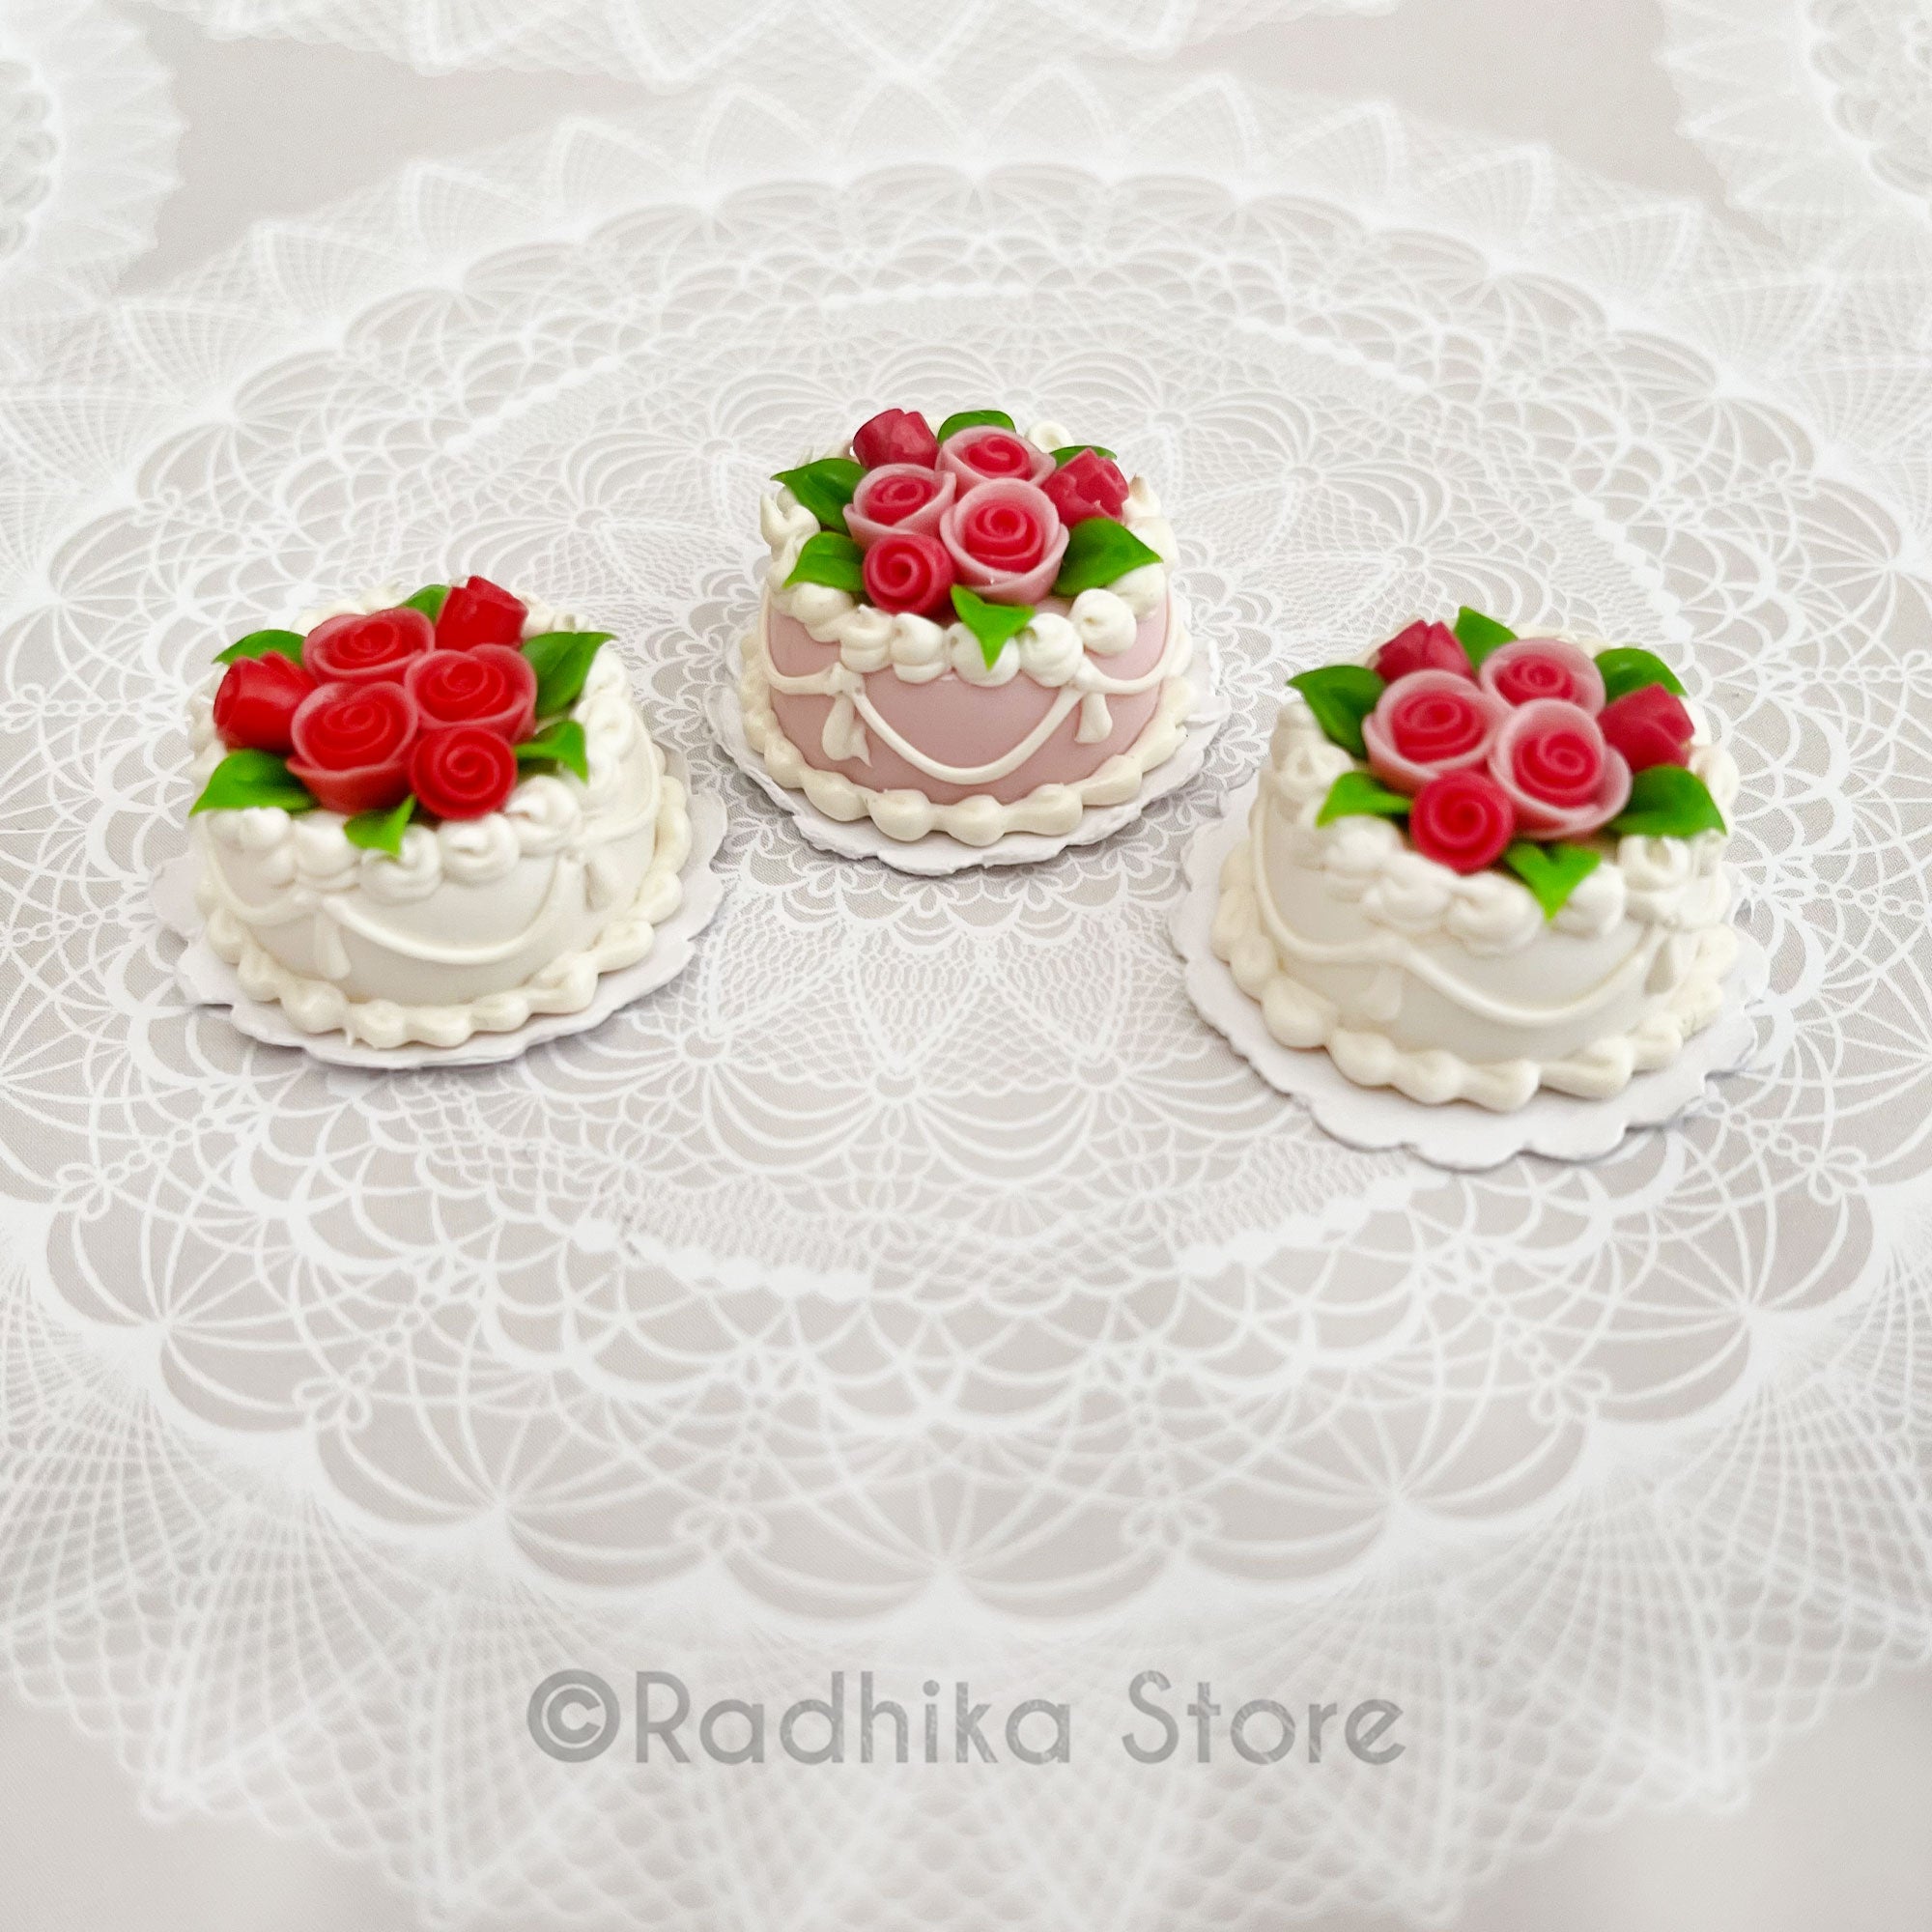 Small Round Cakes- Scalloped Rose Bouquet - Choose Cake